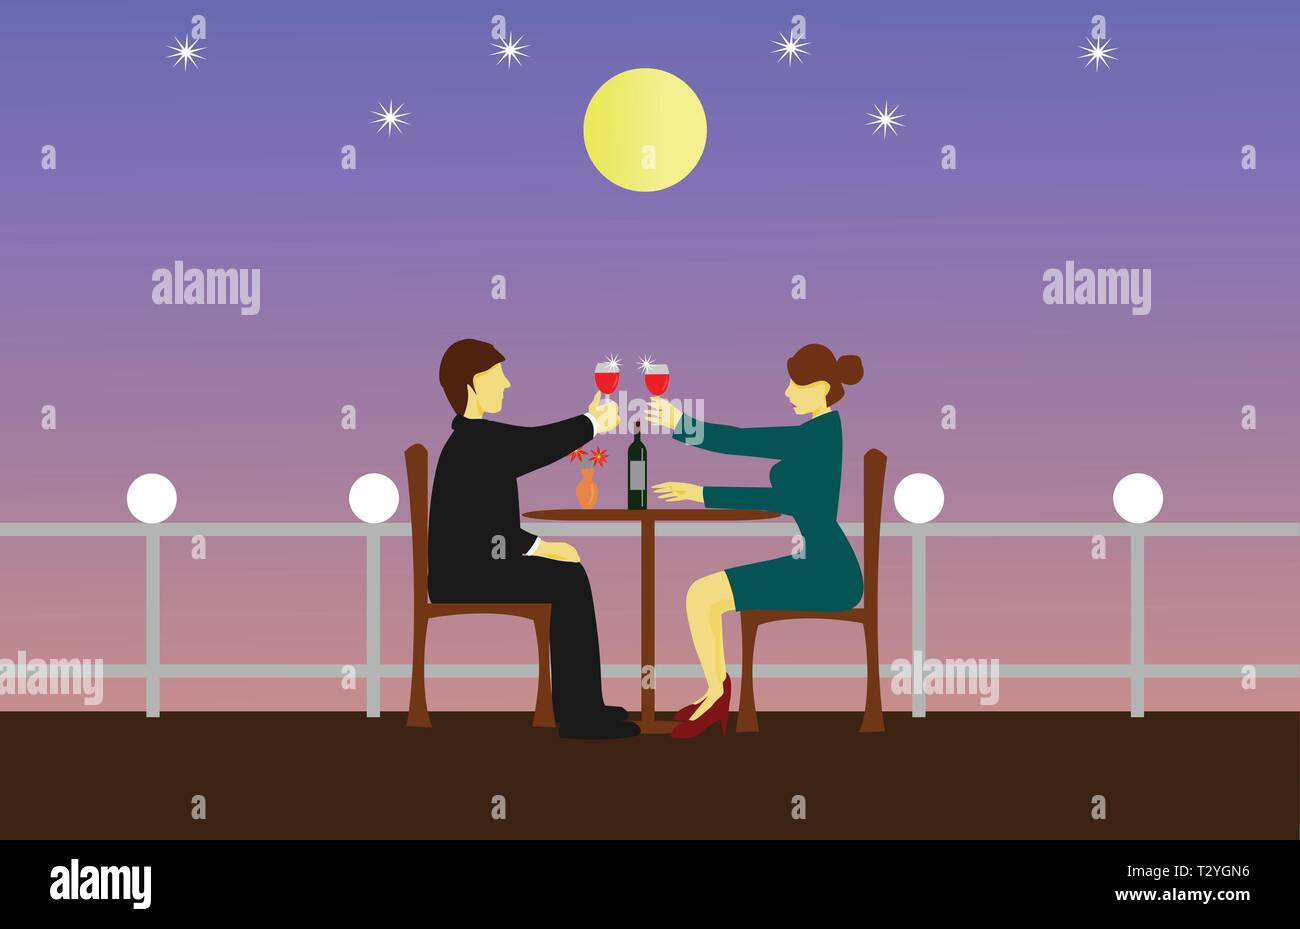 Couples are sipping wine on a wooden table. The rooftop has a moon as the background. Stock Vector